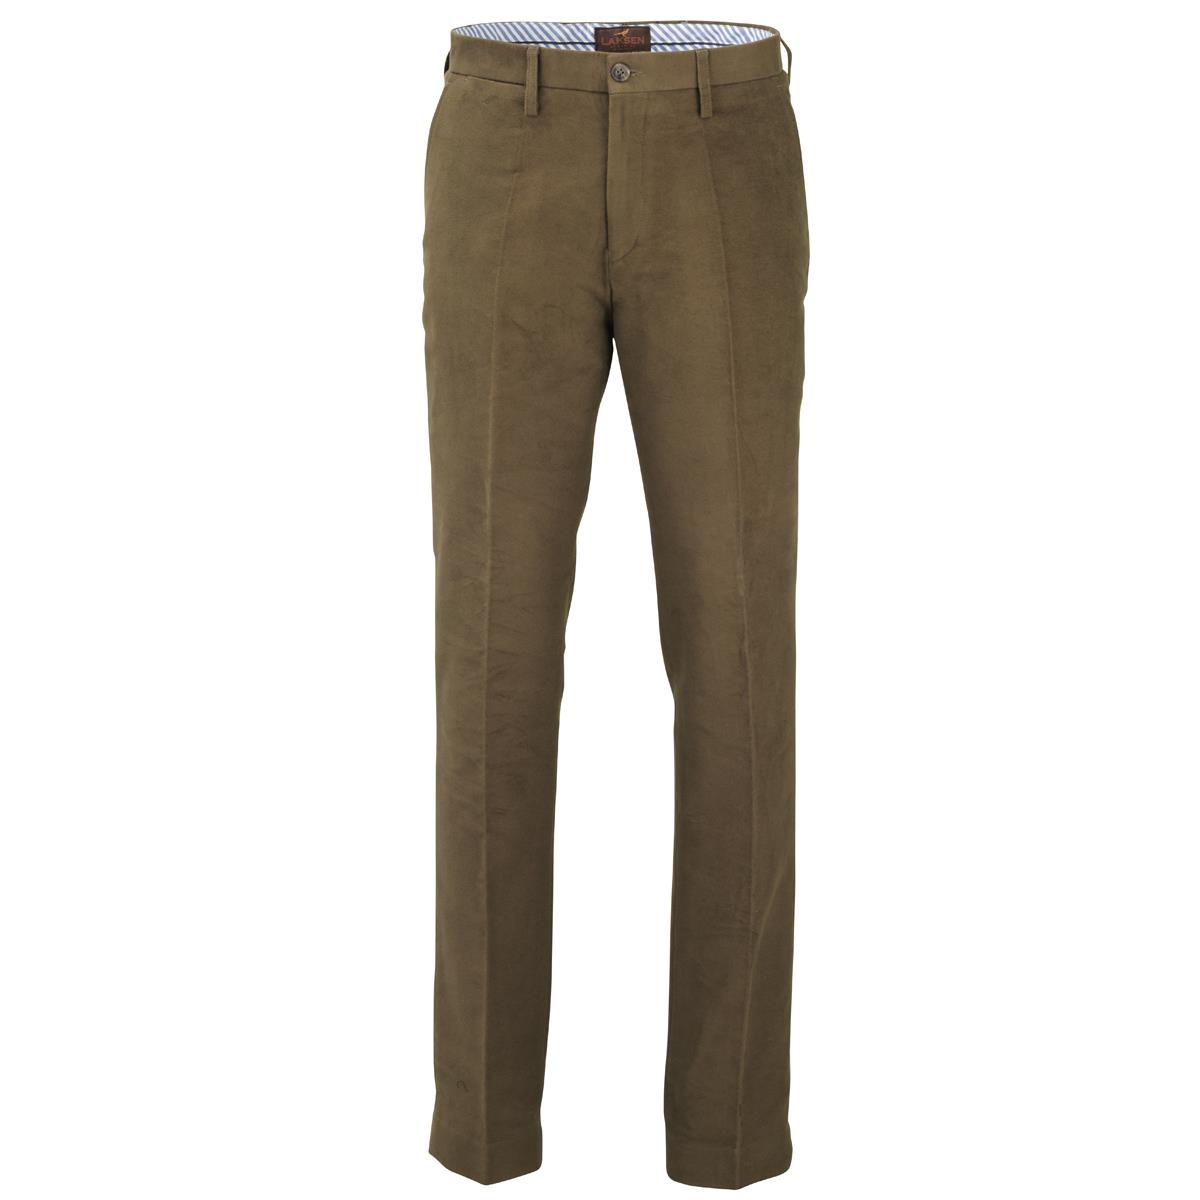 What's the inseam length for a 37 UK waist in Laksen Broadlands trousers?